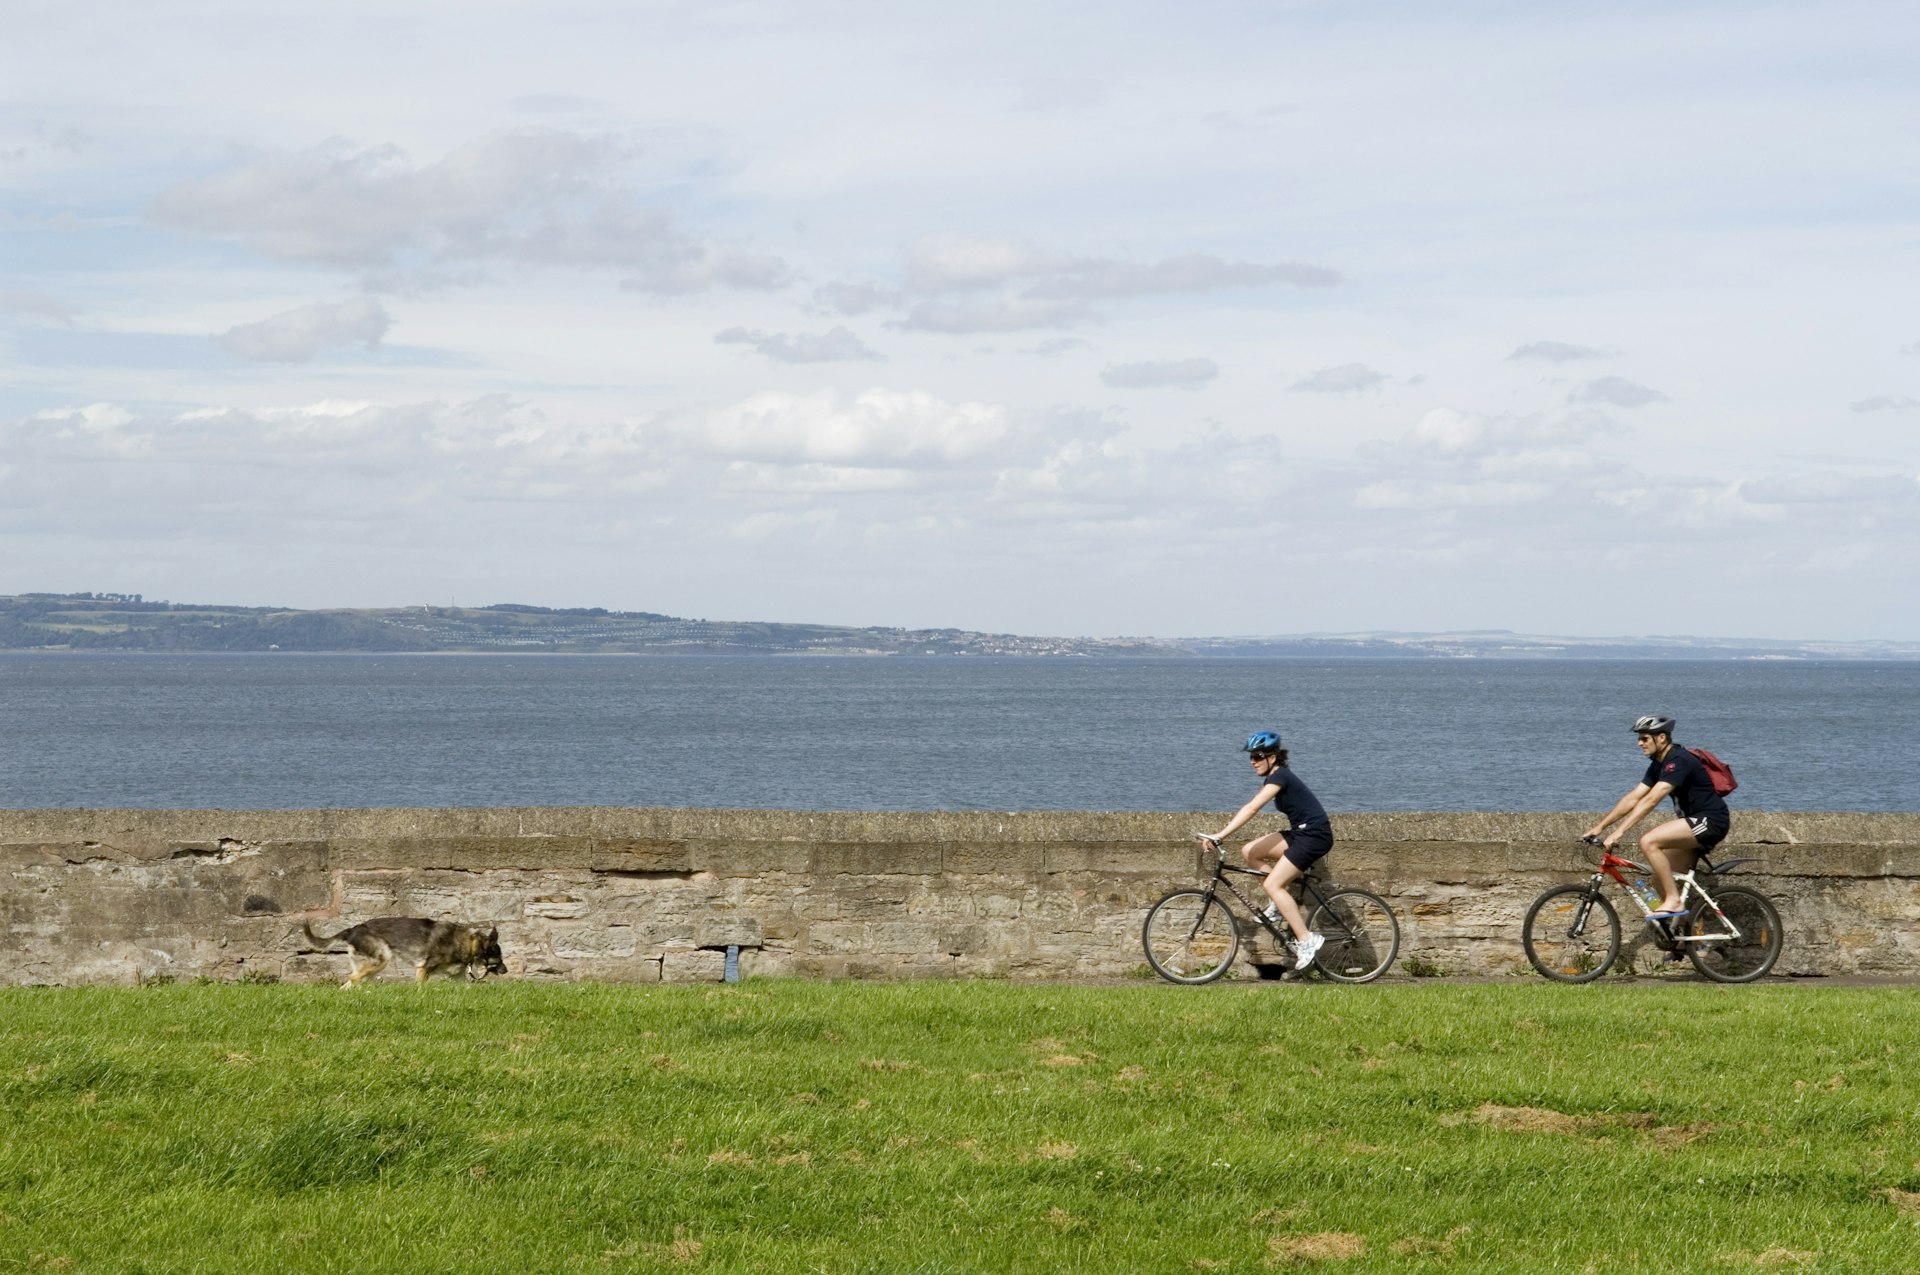 Two cyclists ride their bikes along a path near a body of water